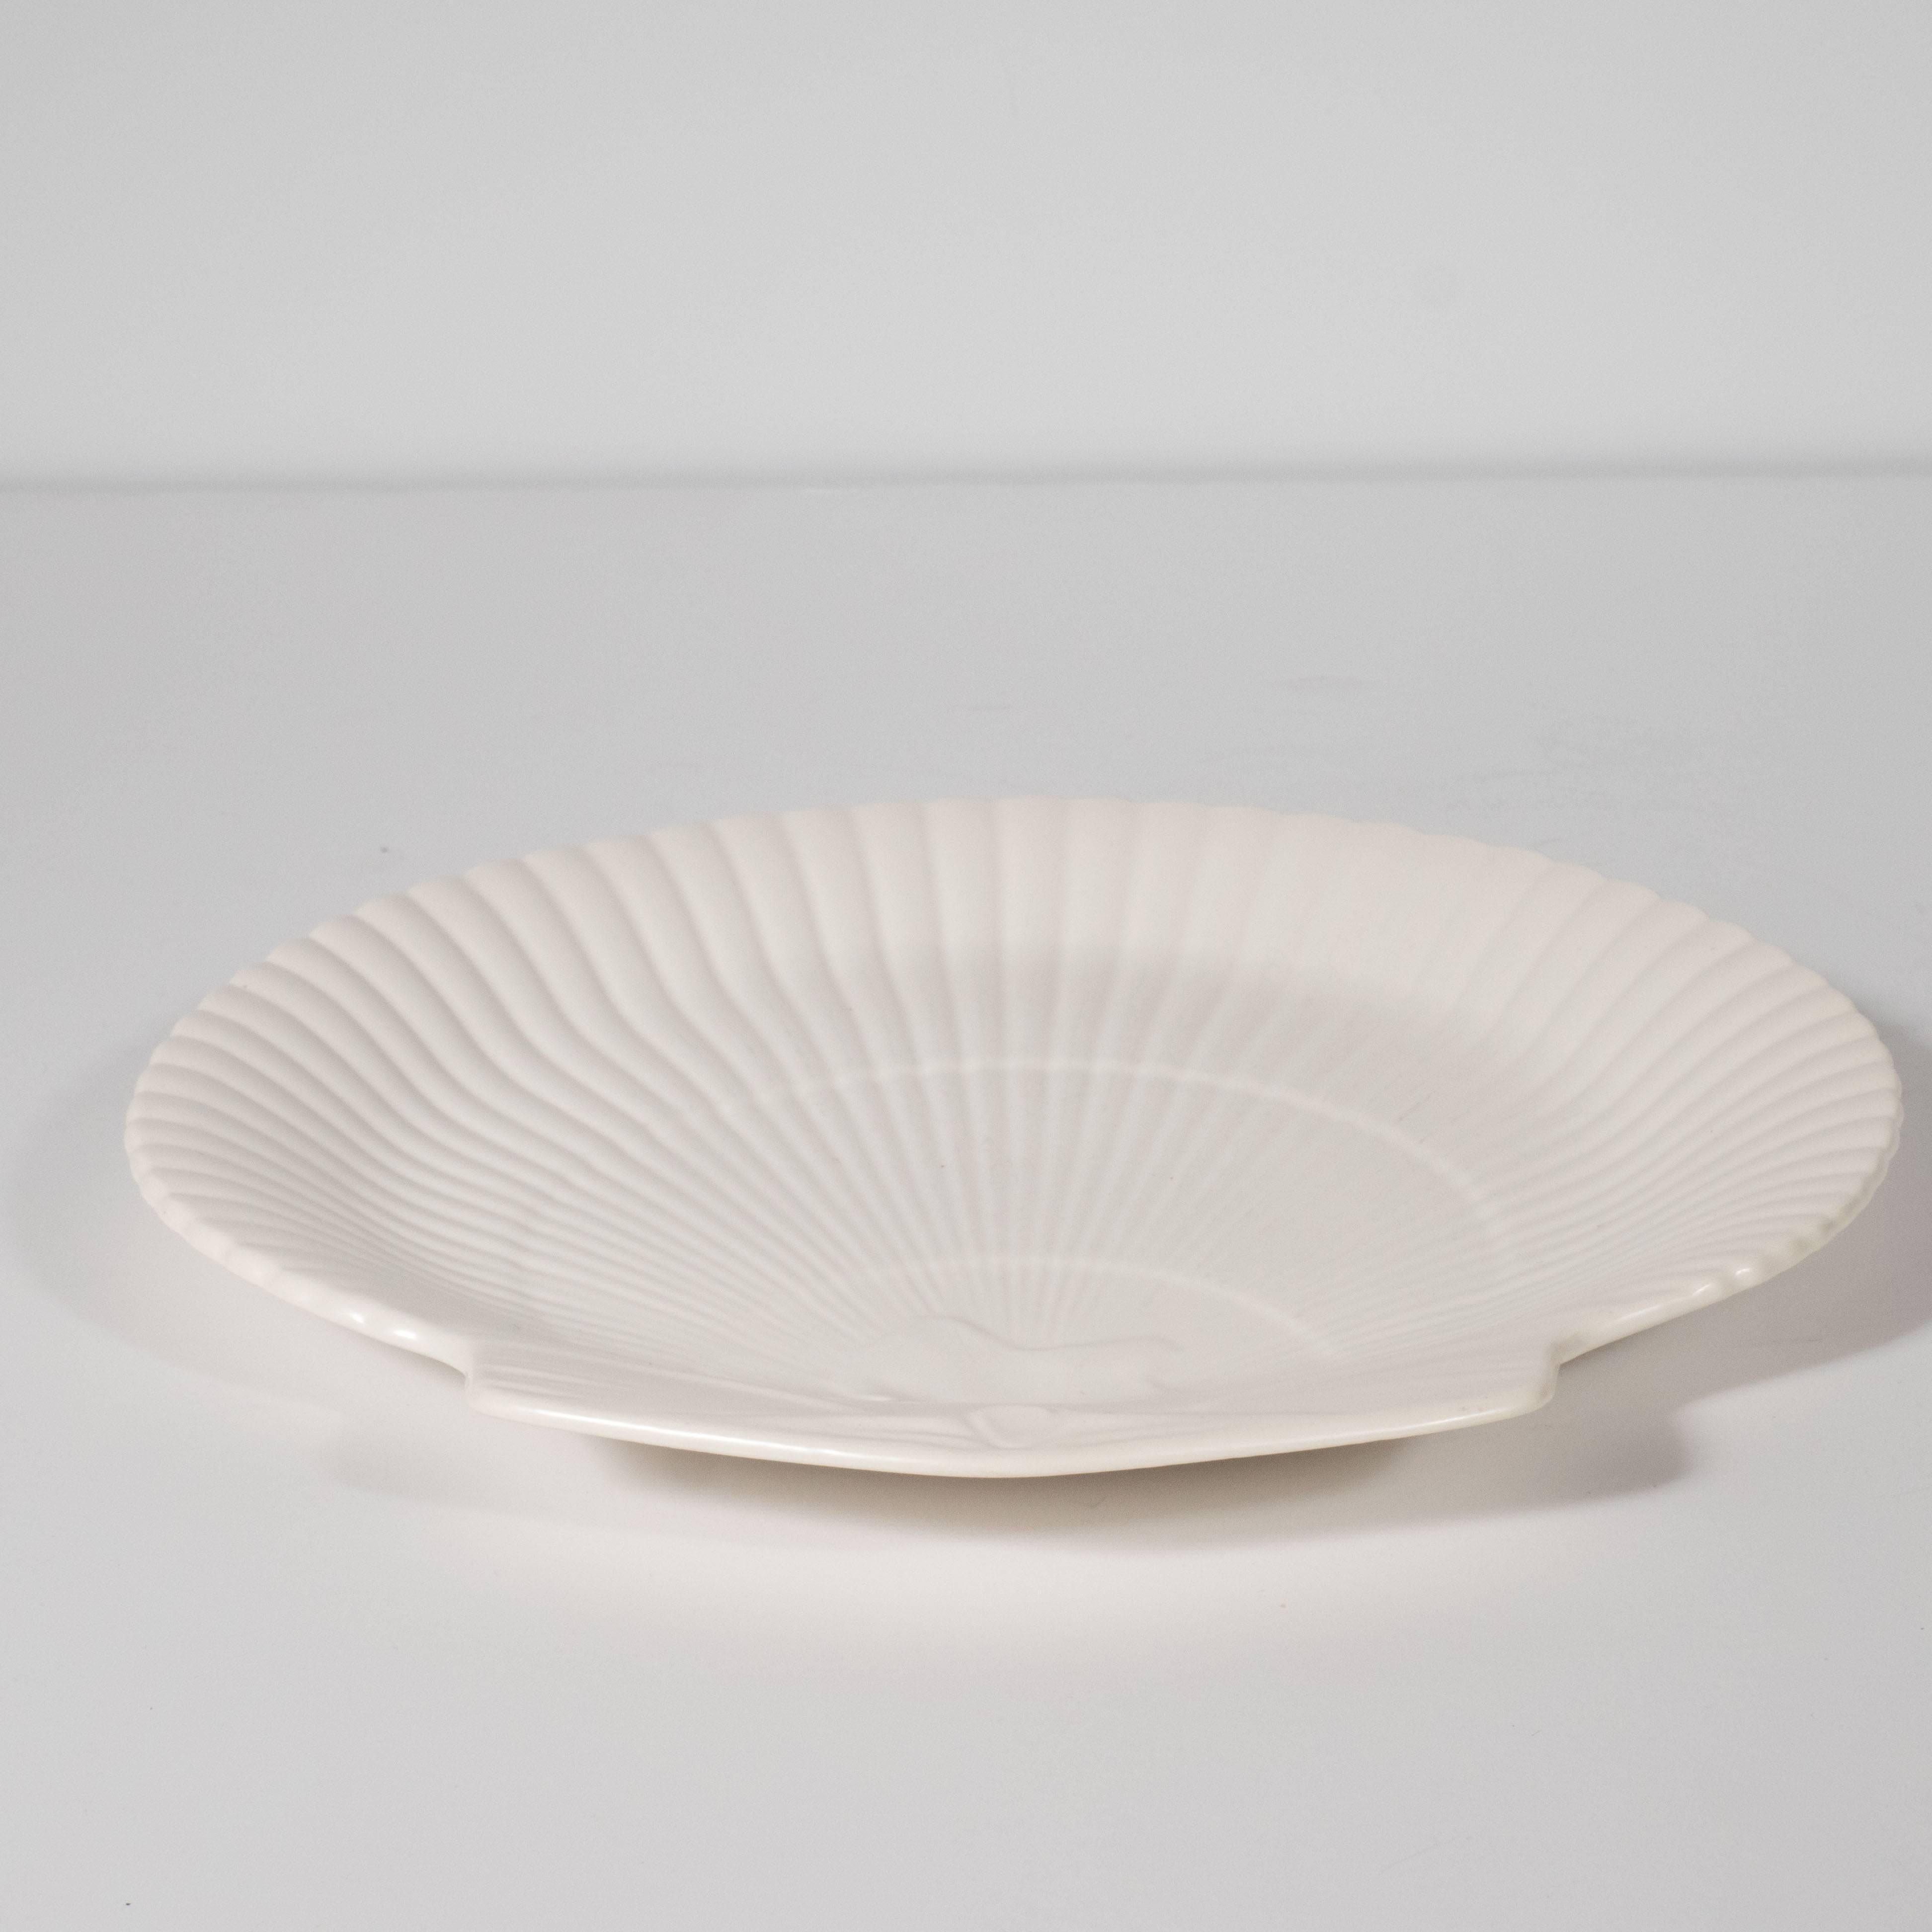 This elegant set of twelve scallop dishes were realized by Wedgwood- one of the most renowned pottery makers in England, circa 1950. Each offers the form of a scallop shell with an abundance of ray-like striations emanating from the bottom centre